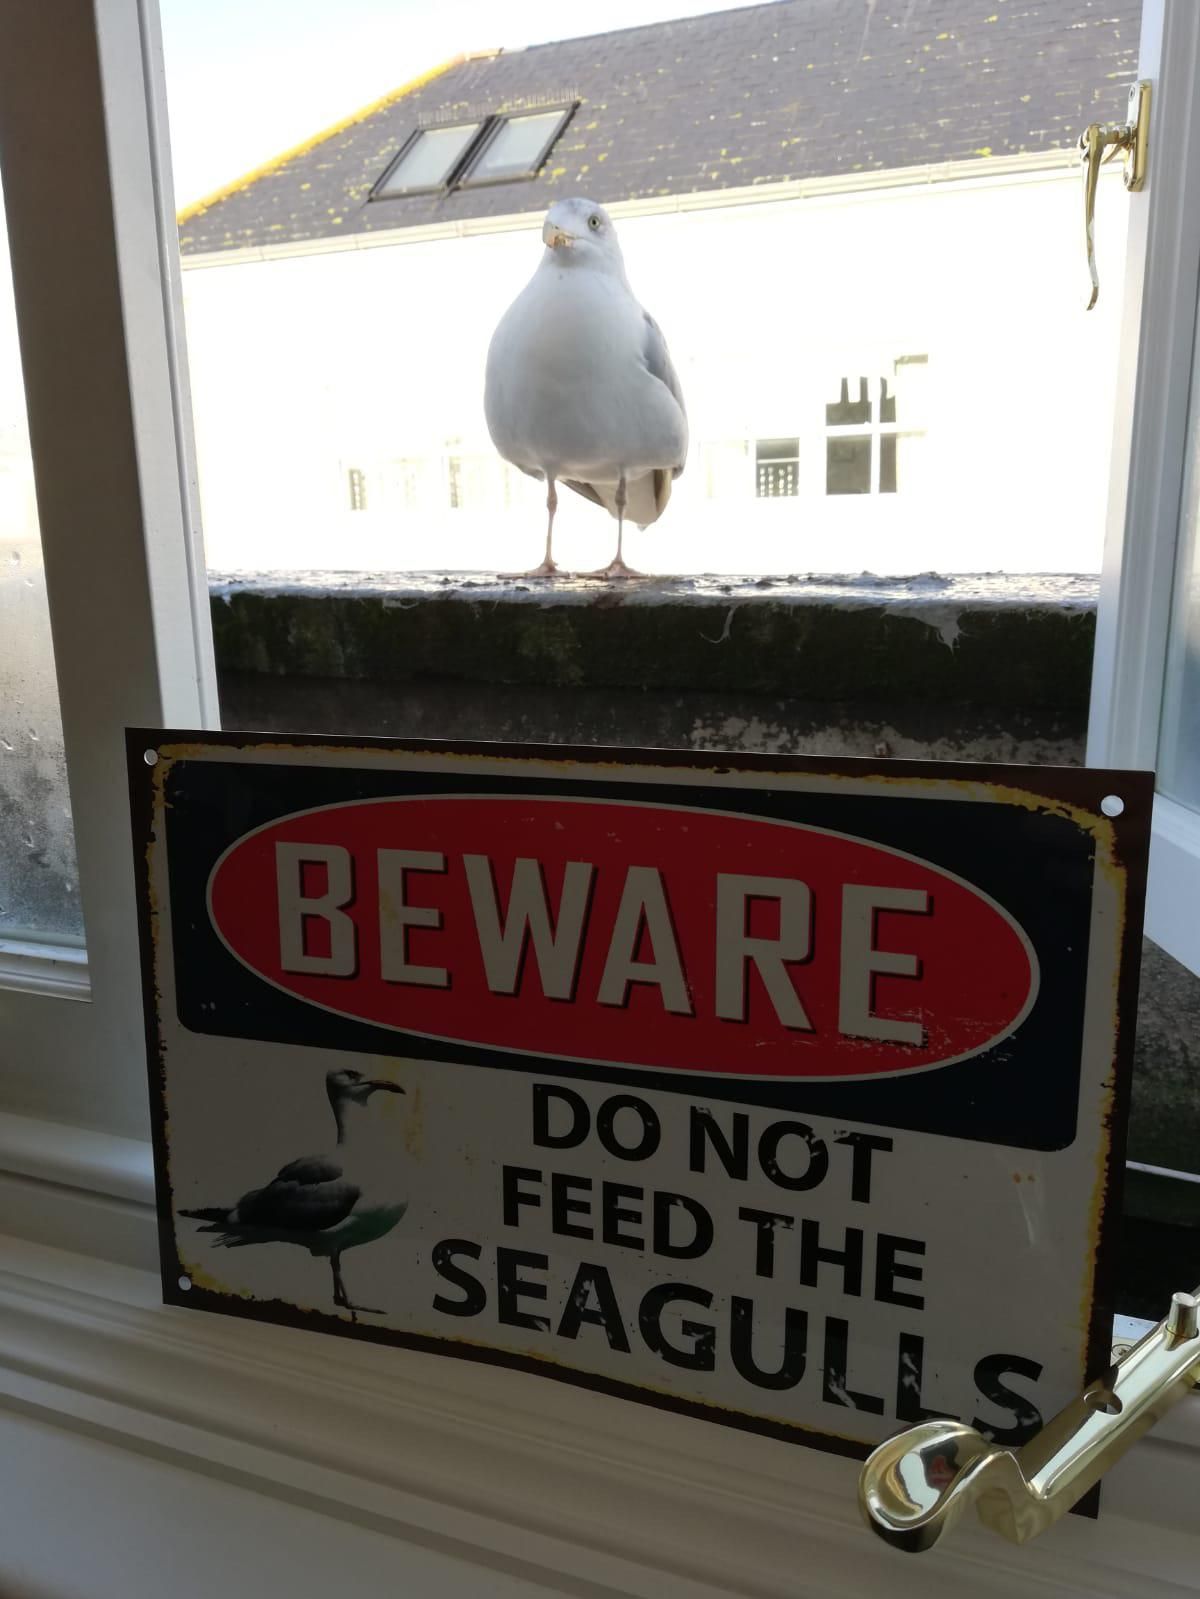 My brother has been feeding a seagull scraps from his windowsill for weeks, so my girlfriend bought him this sign. Safe to say the seagull was not impressed.